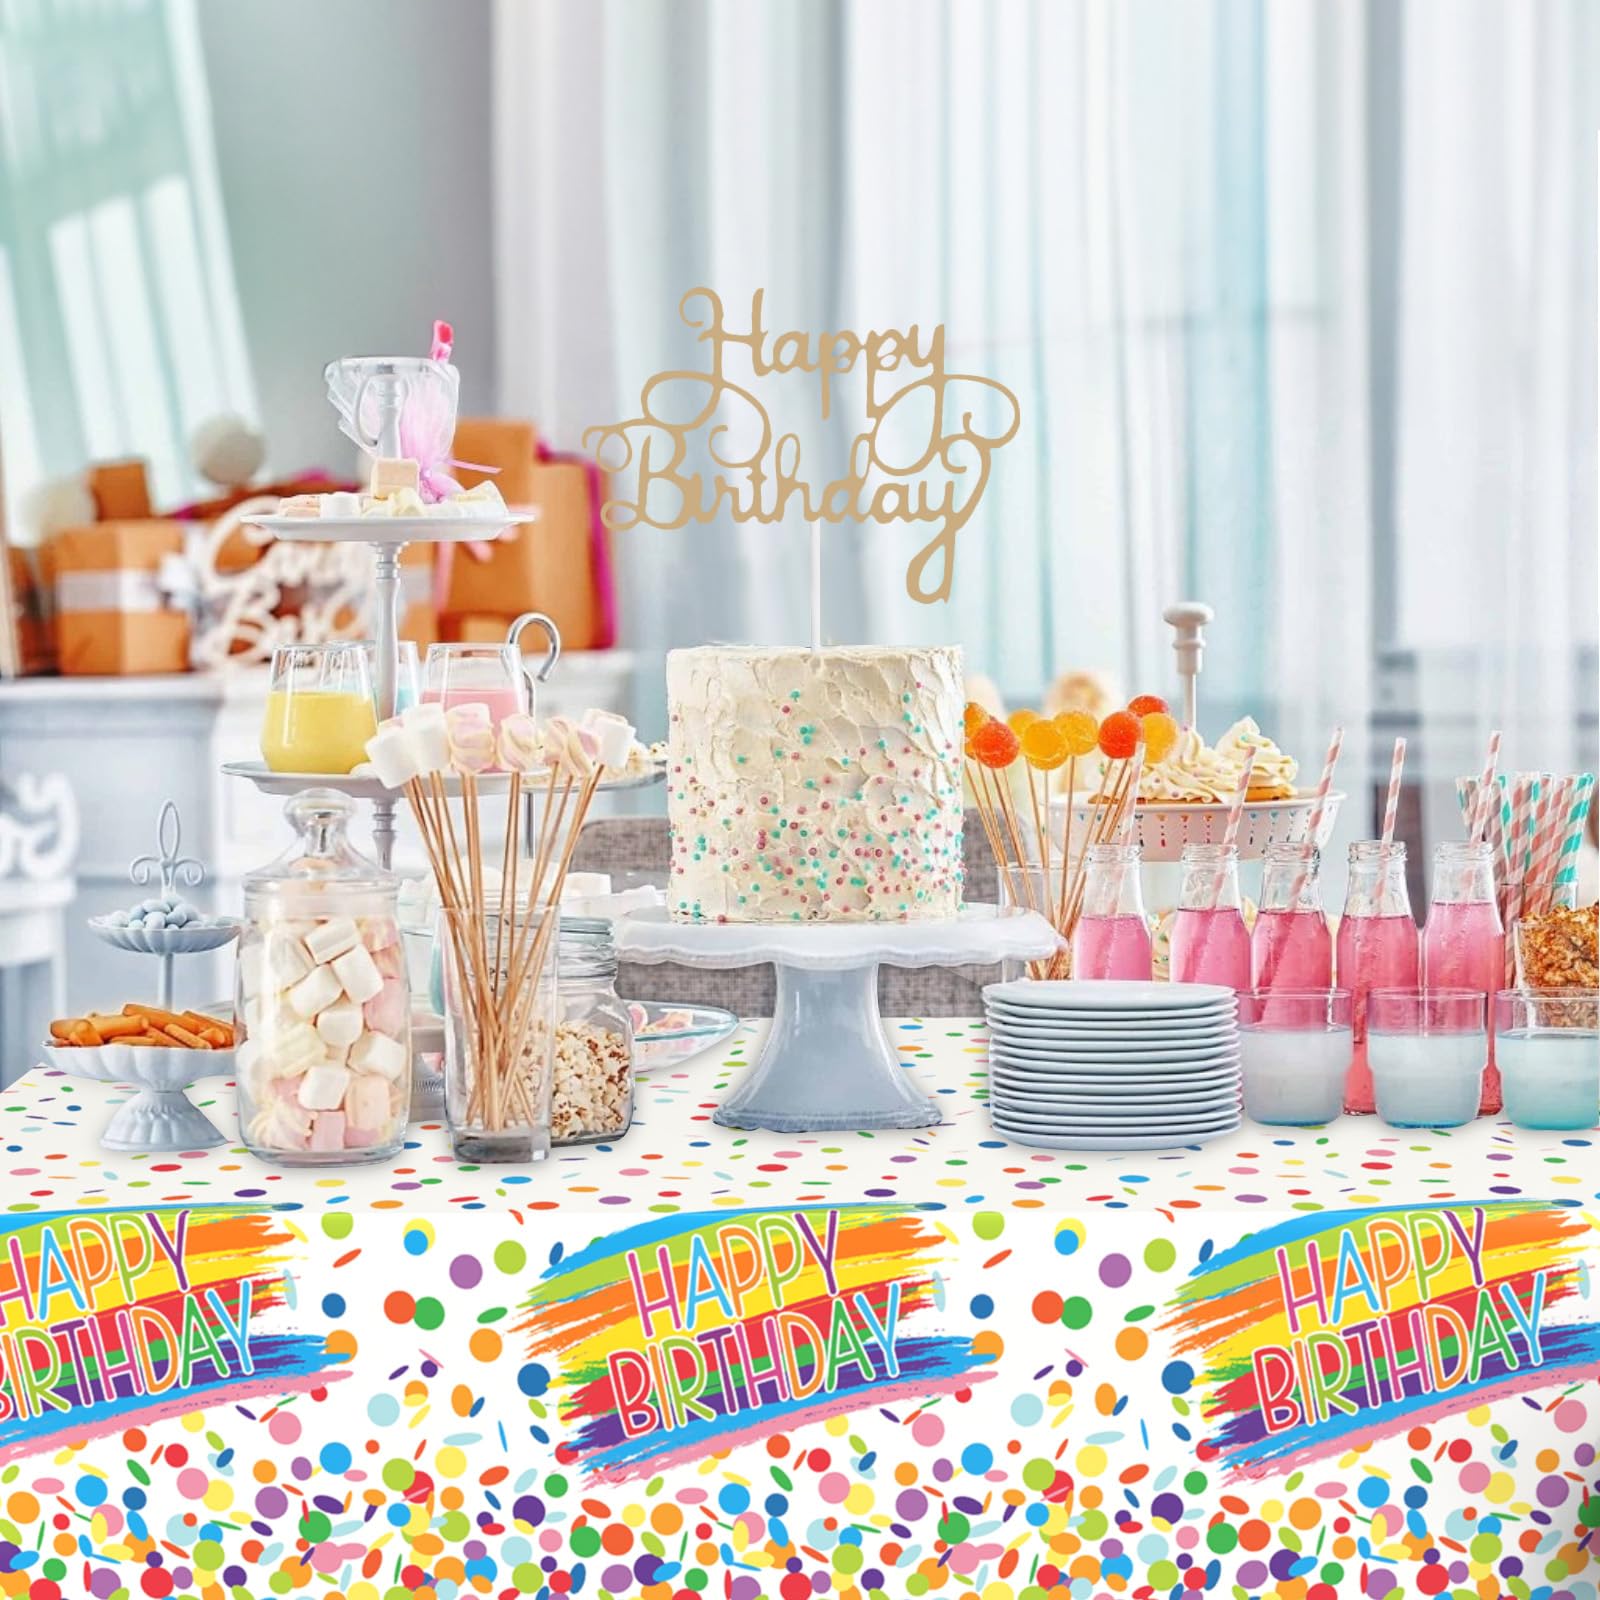 FunHot Birthday Tablecloth, Colorful Birthday Decorations, 54 x 108 Inch Waterproof Rectangle Happy Birthday Table Cover for Baby Shower Boys Girls Women Men Birthday Party Decorations